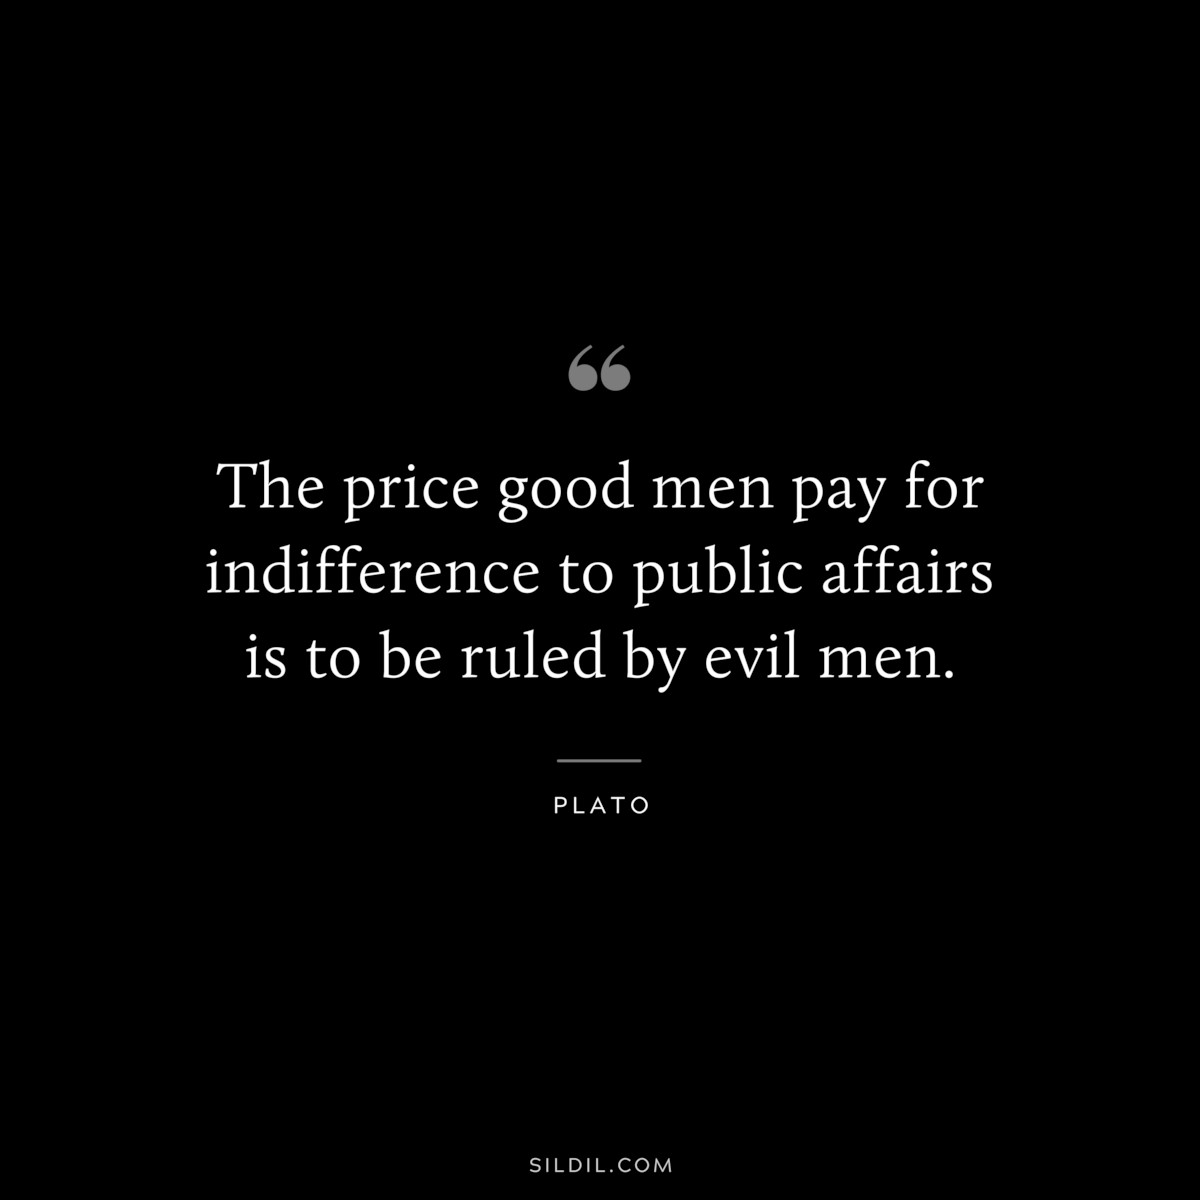 The price good men pay for indifference to public affairs is to be ruled by evil men. ― Plato